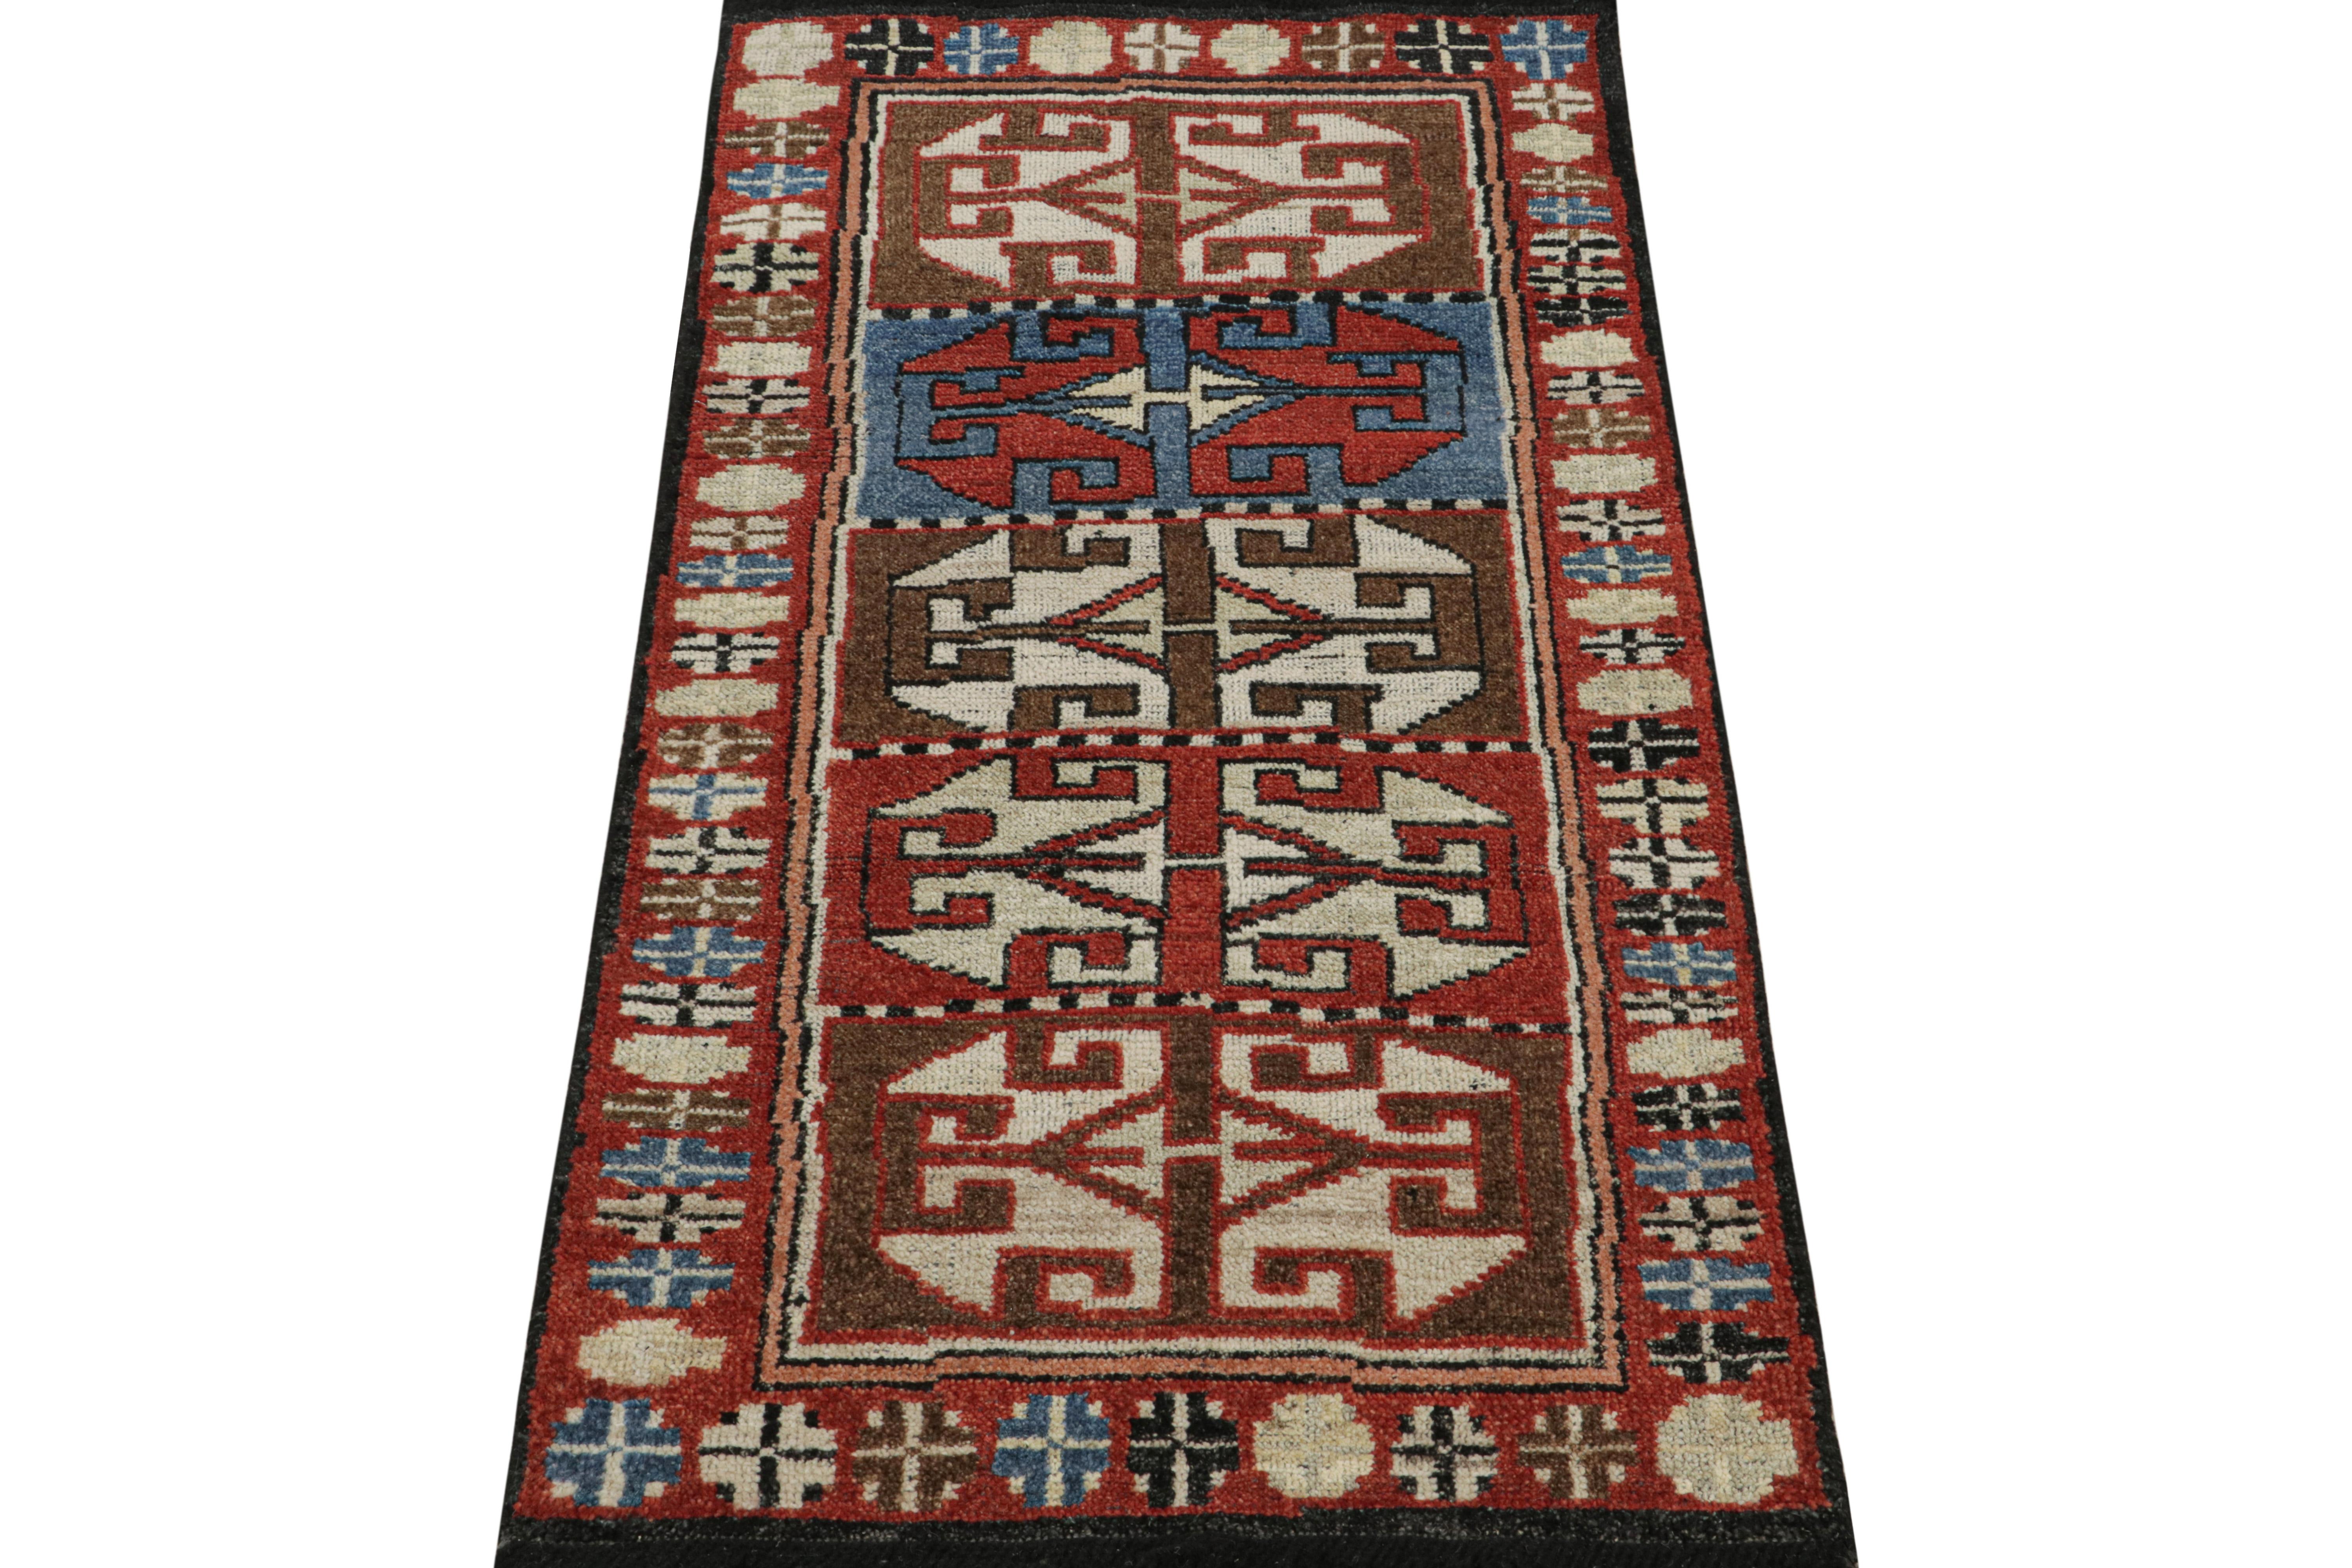 Indian Rug & Kilim’s Antique Tribal Style Rug in Red, Blue & Brown Patterns For Sale